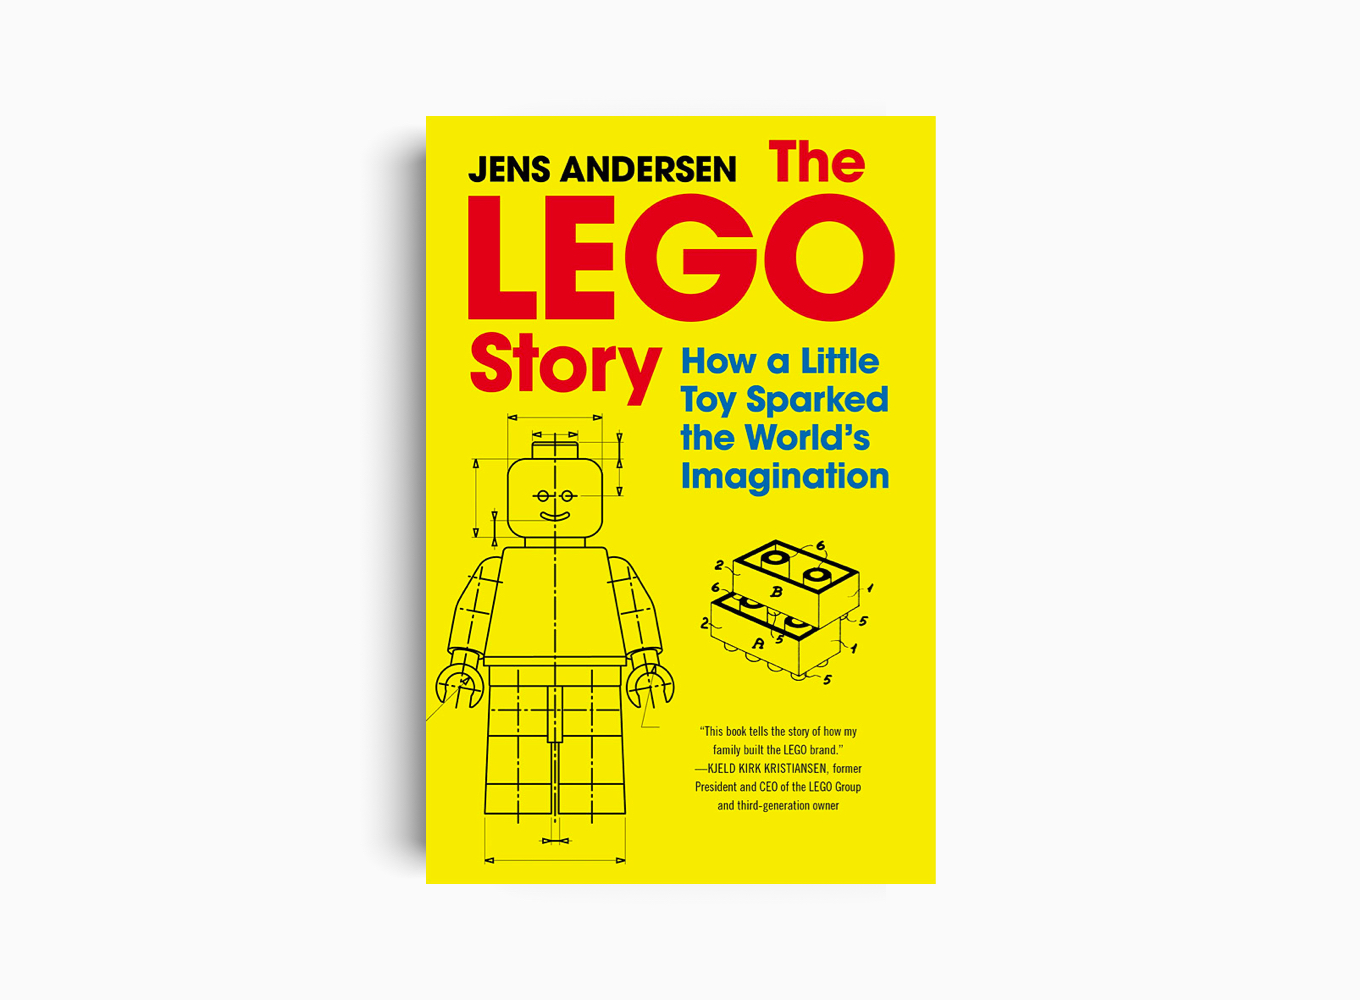 THE LEGO STORY